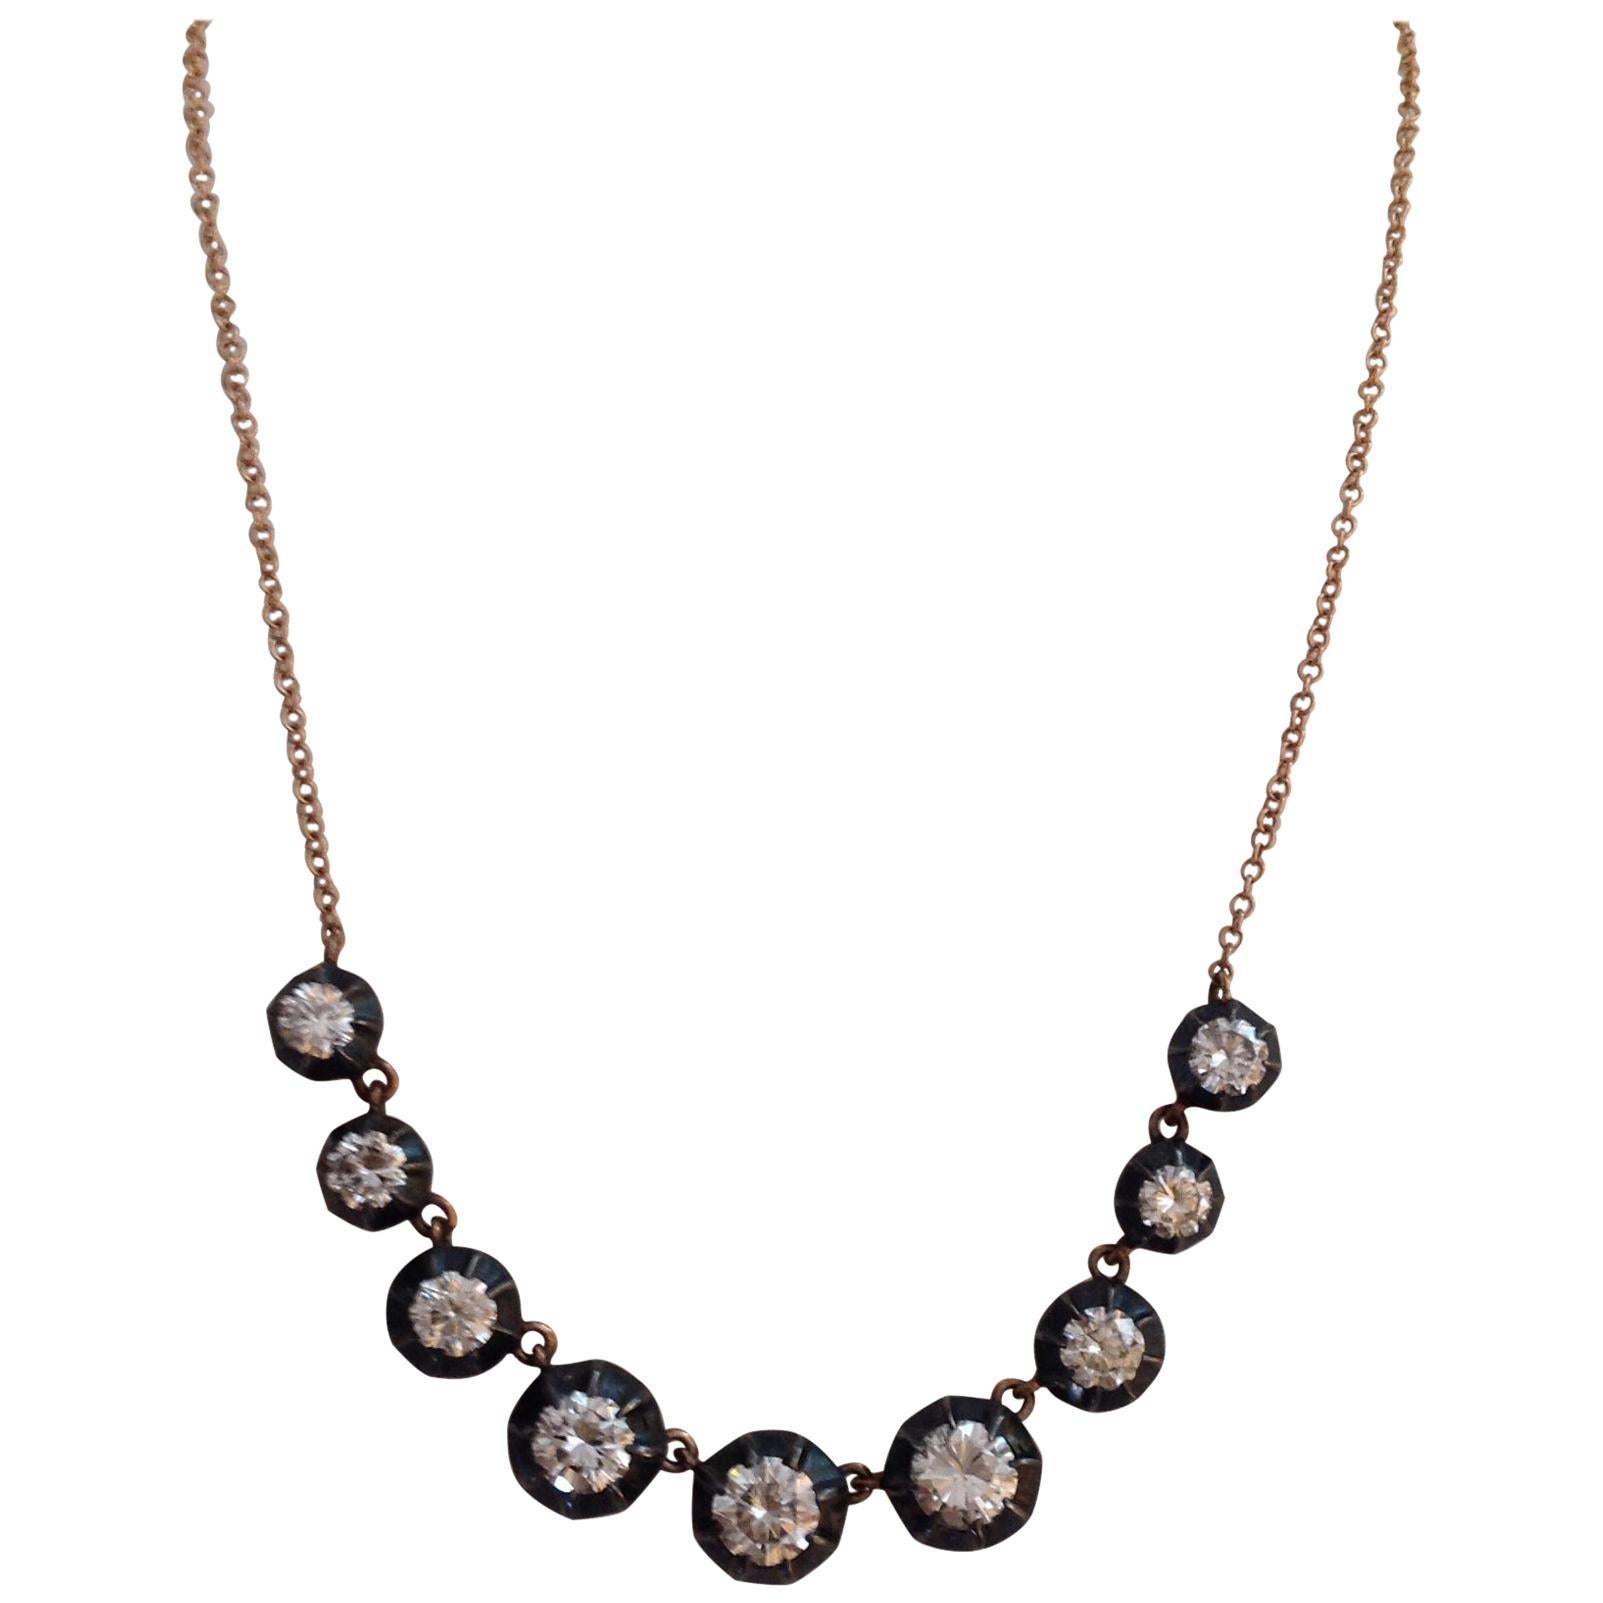 Antique Style Diamond Riviere Necklace with 18 Karat Rose Gold Chain For Sale